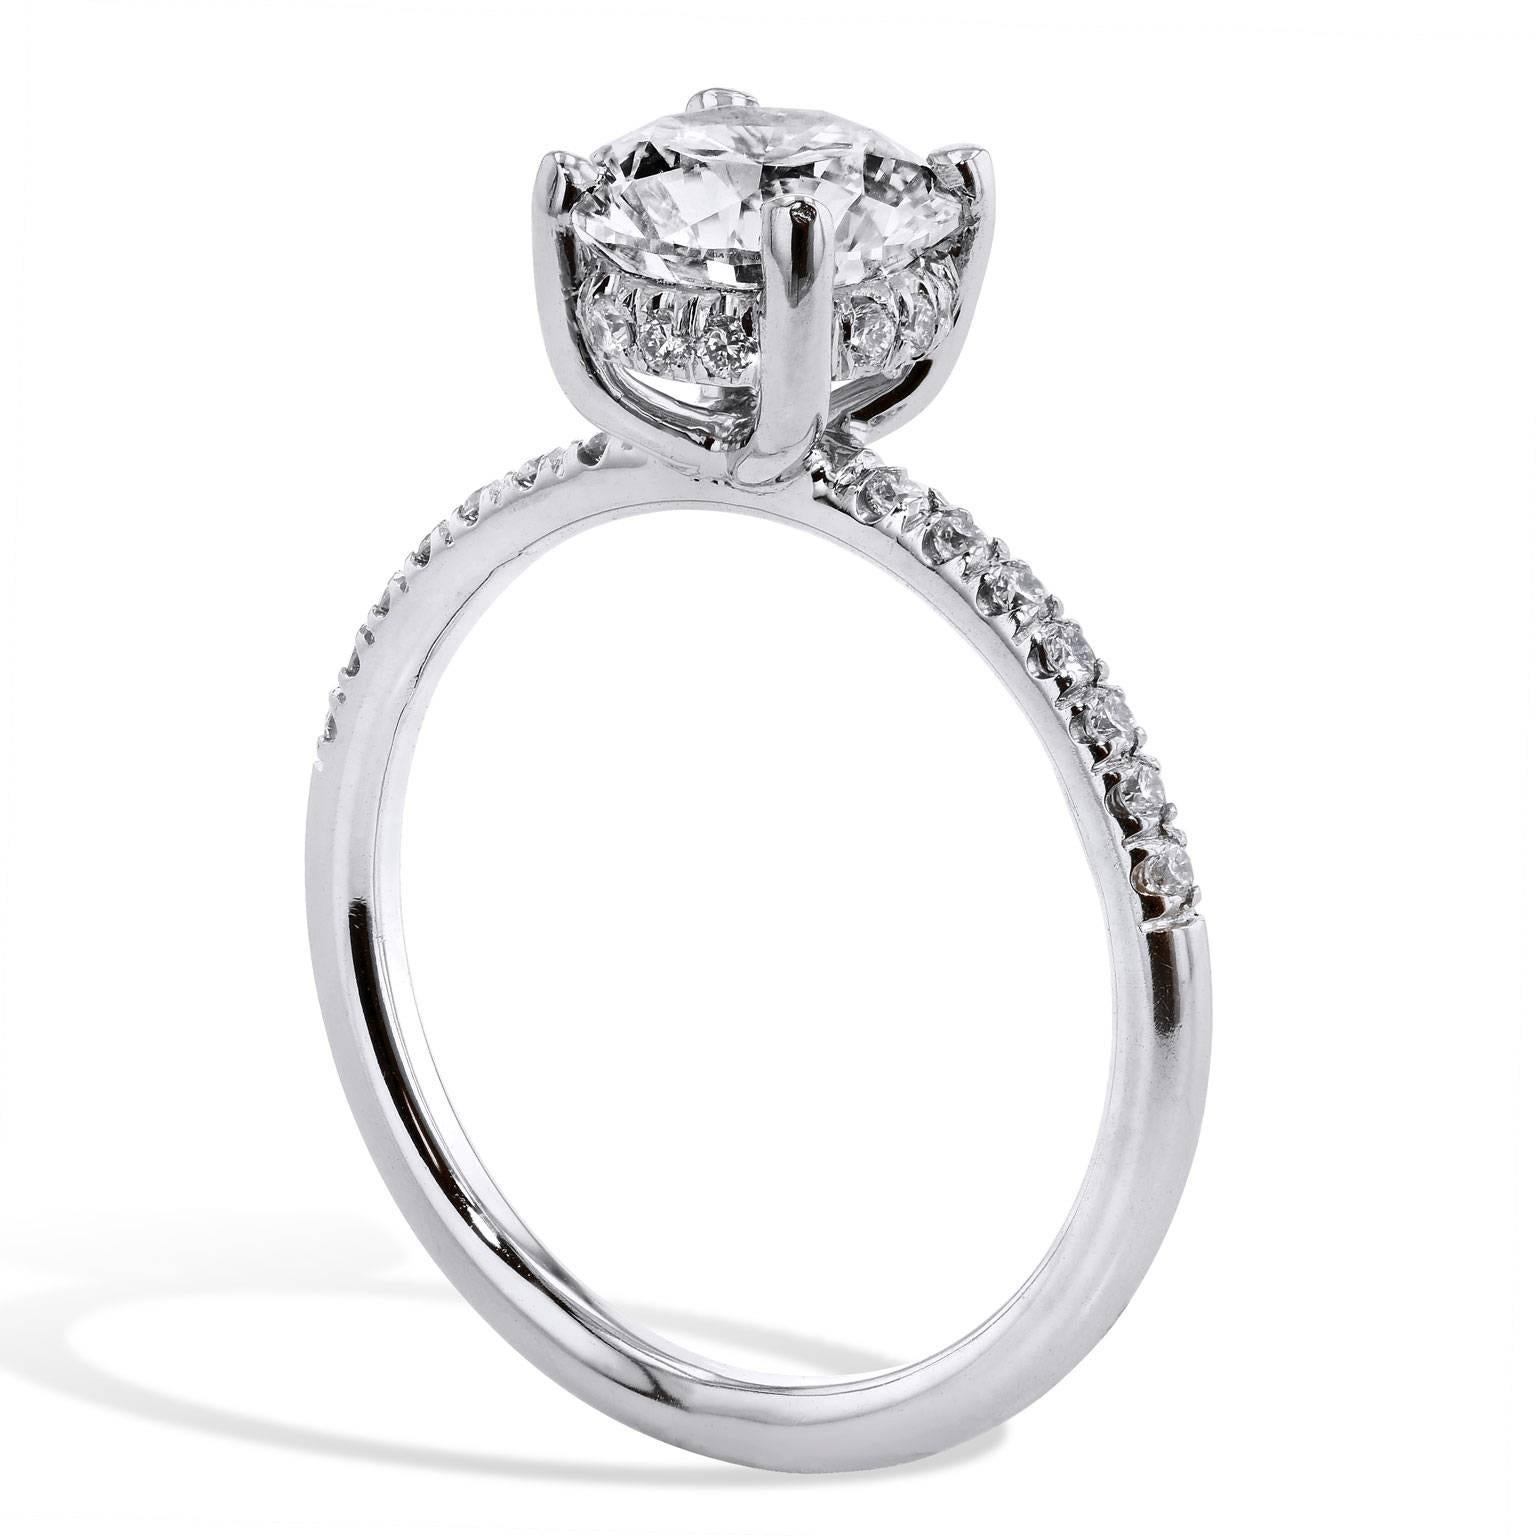 Breathtaking natural beauty defines this handmade engagement ring. Handmade in platinum by H, this ring features a 1.50 carat GIA certified round brilliant cut prong set diamond graded J/VS1 (GIA#1136496231). The solitaire engagement ring is one of